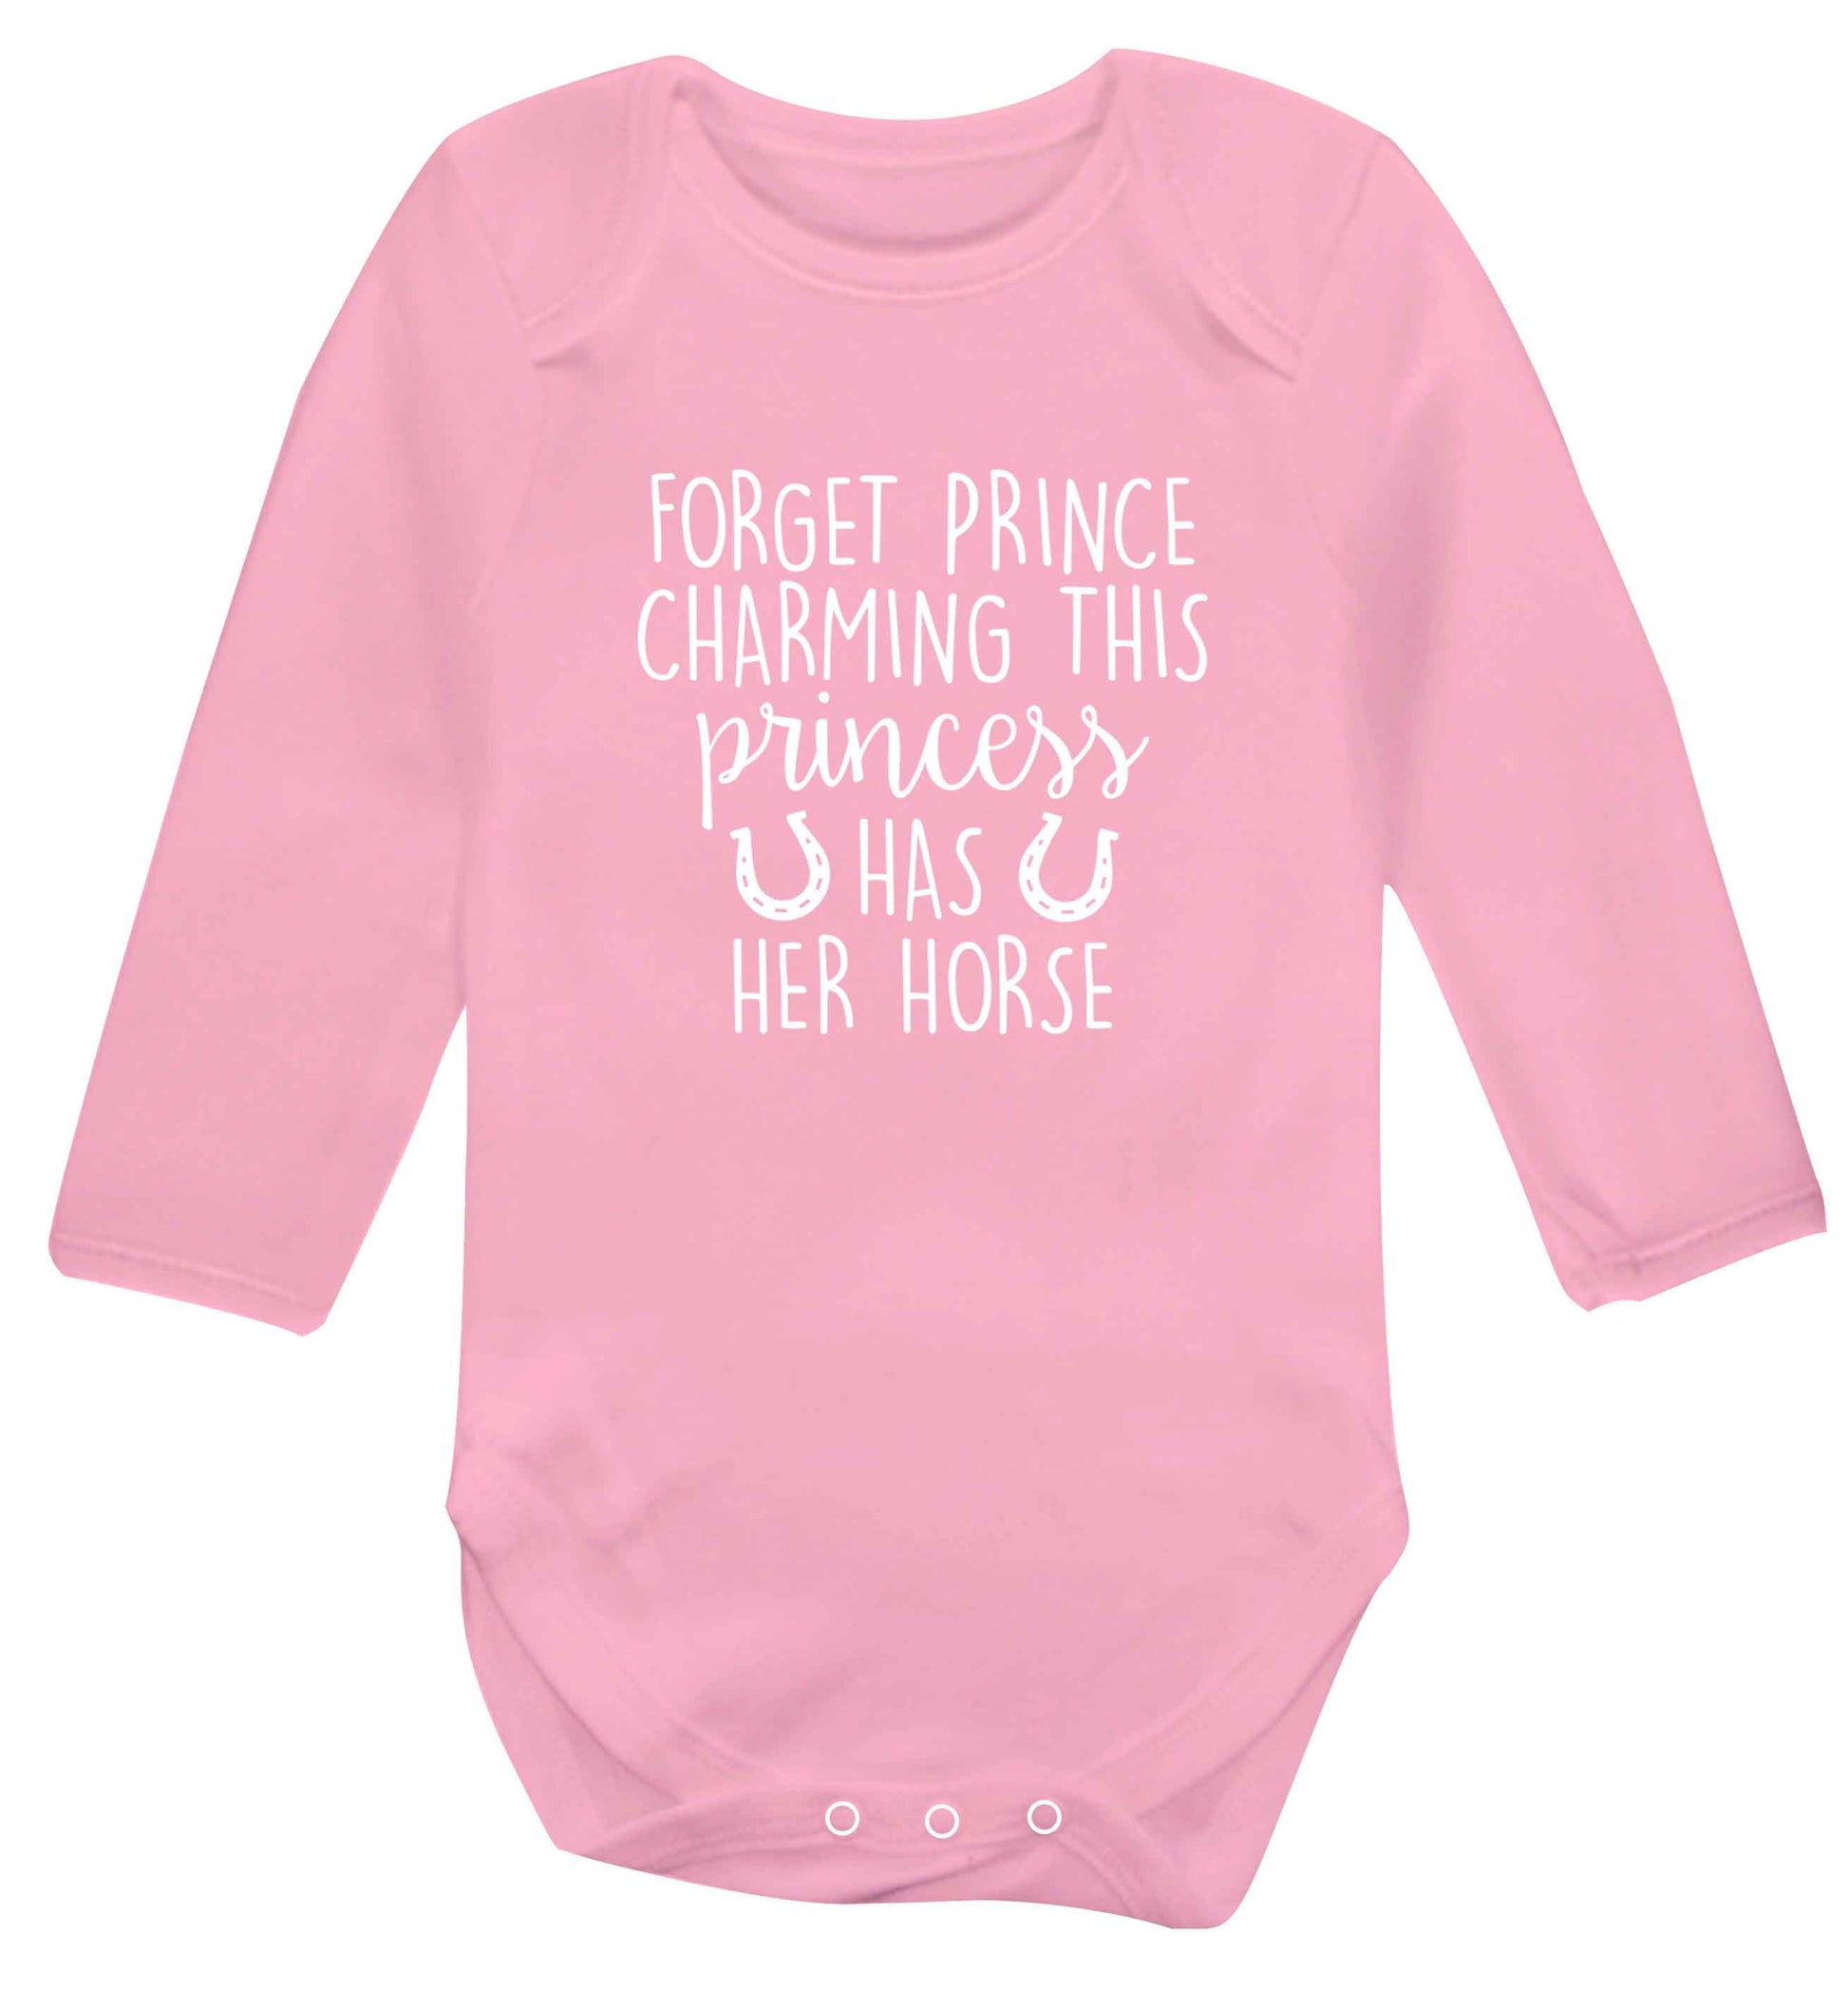 Forget prince charming this princess has her horse baby vest long sleeved pale pink 6-12 months